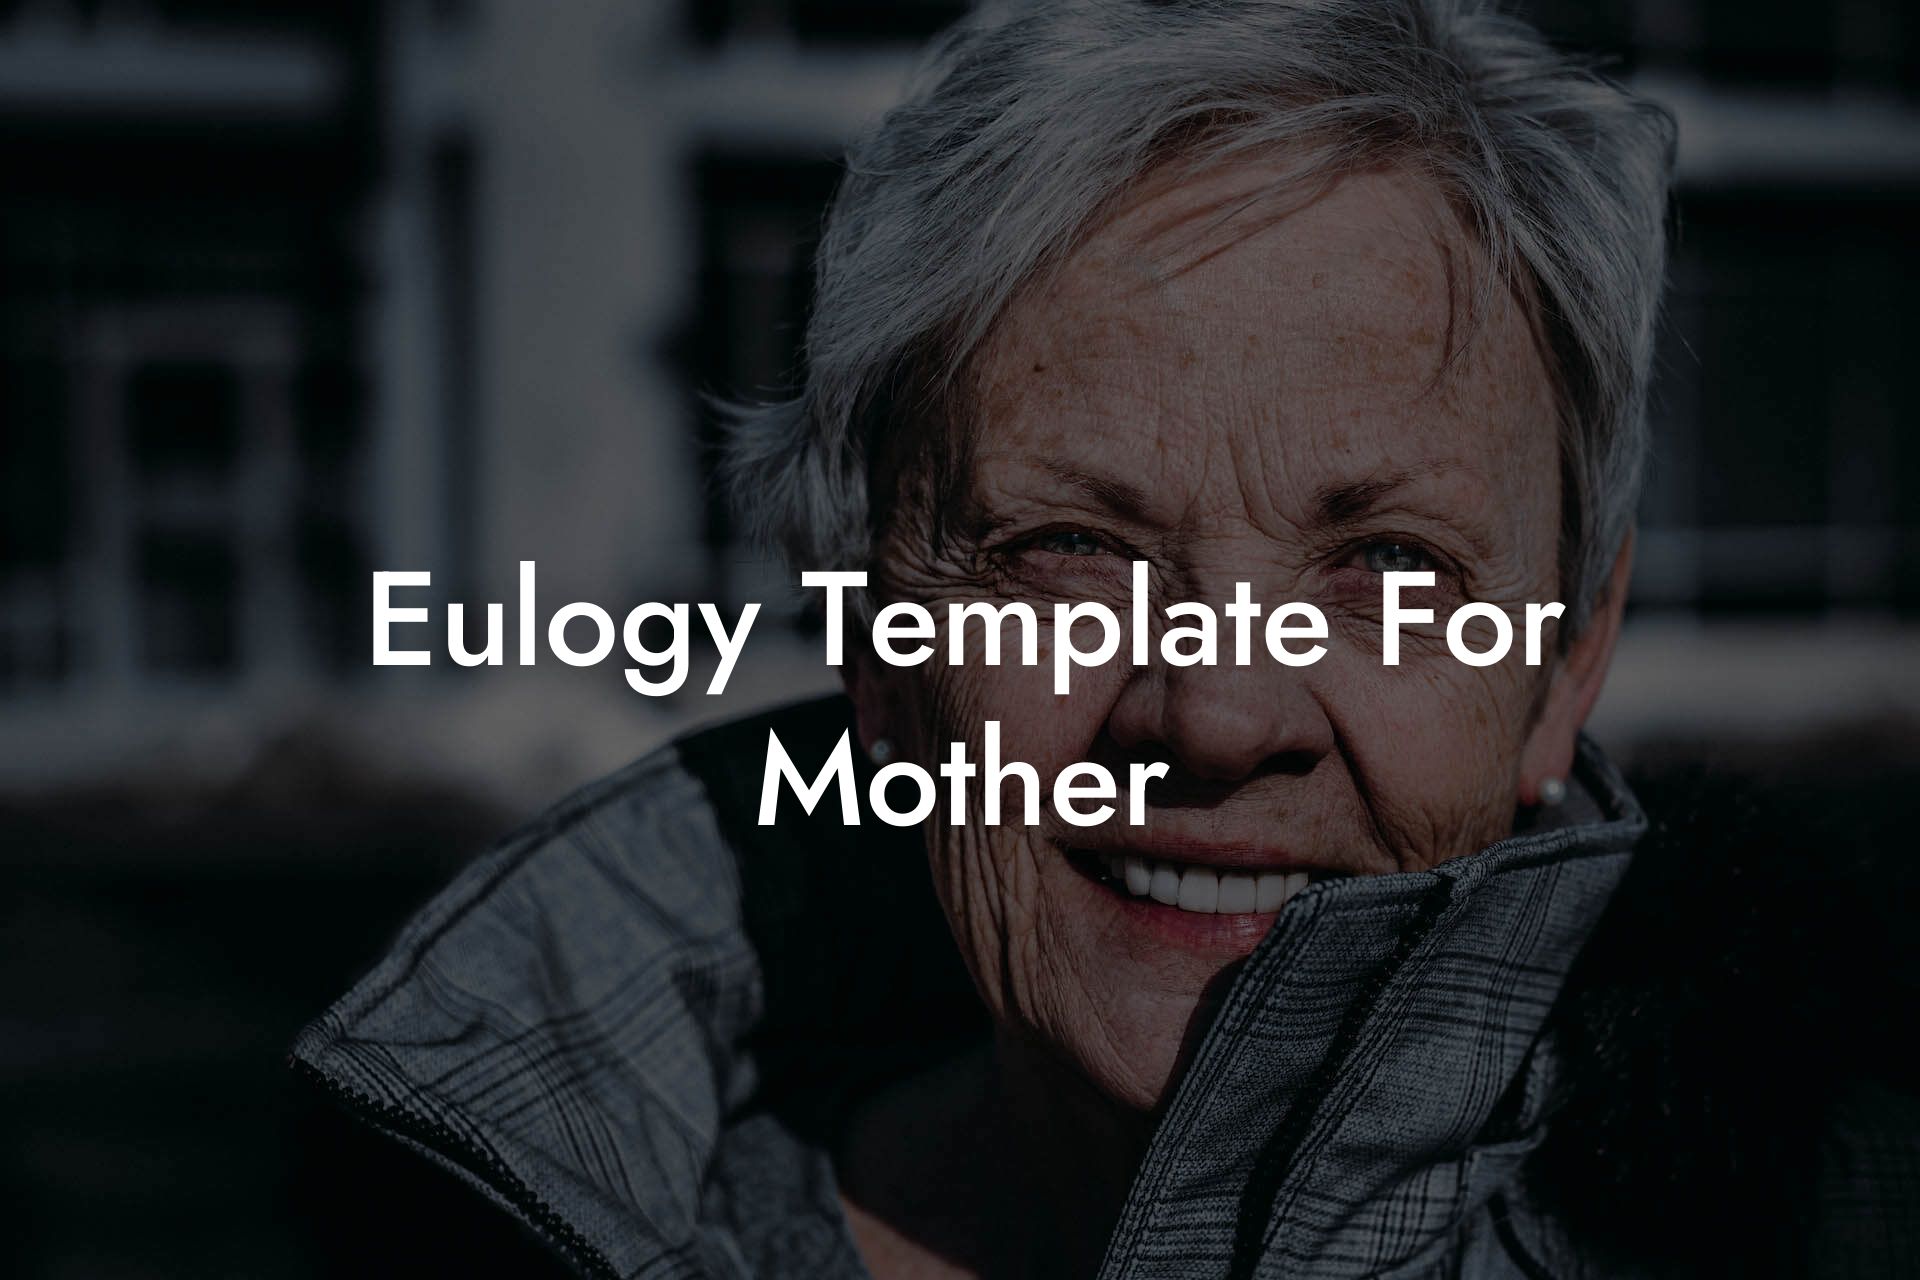 Eulogy Template For Mother